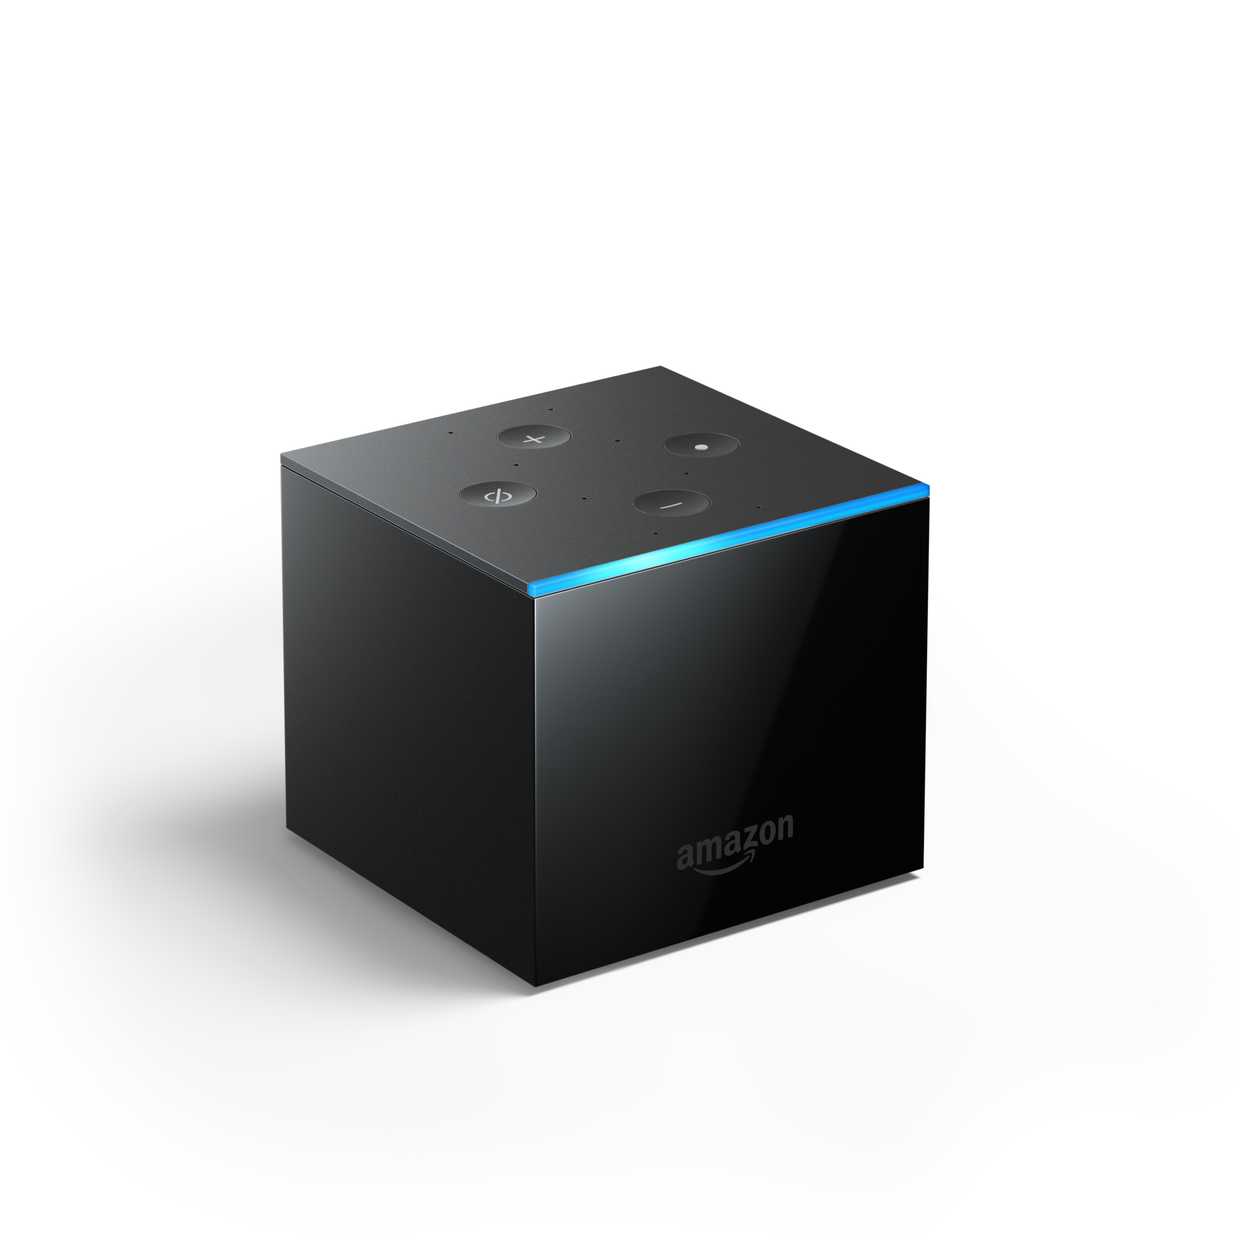 What you will get from this new Alexa enabled Amazon Fire TV cube cover image